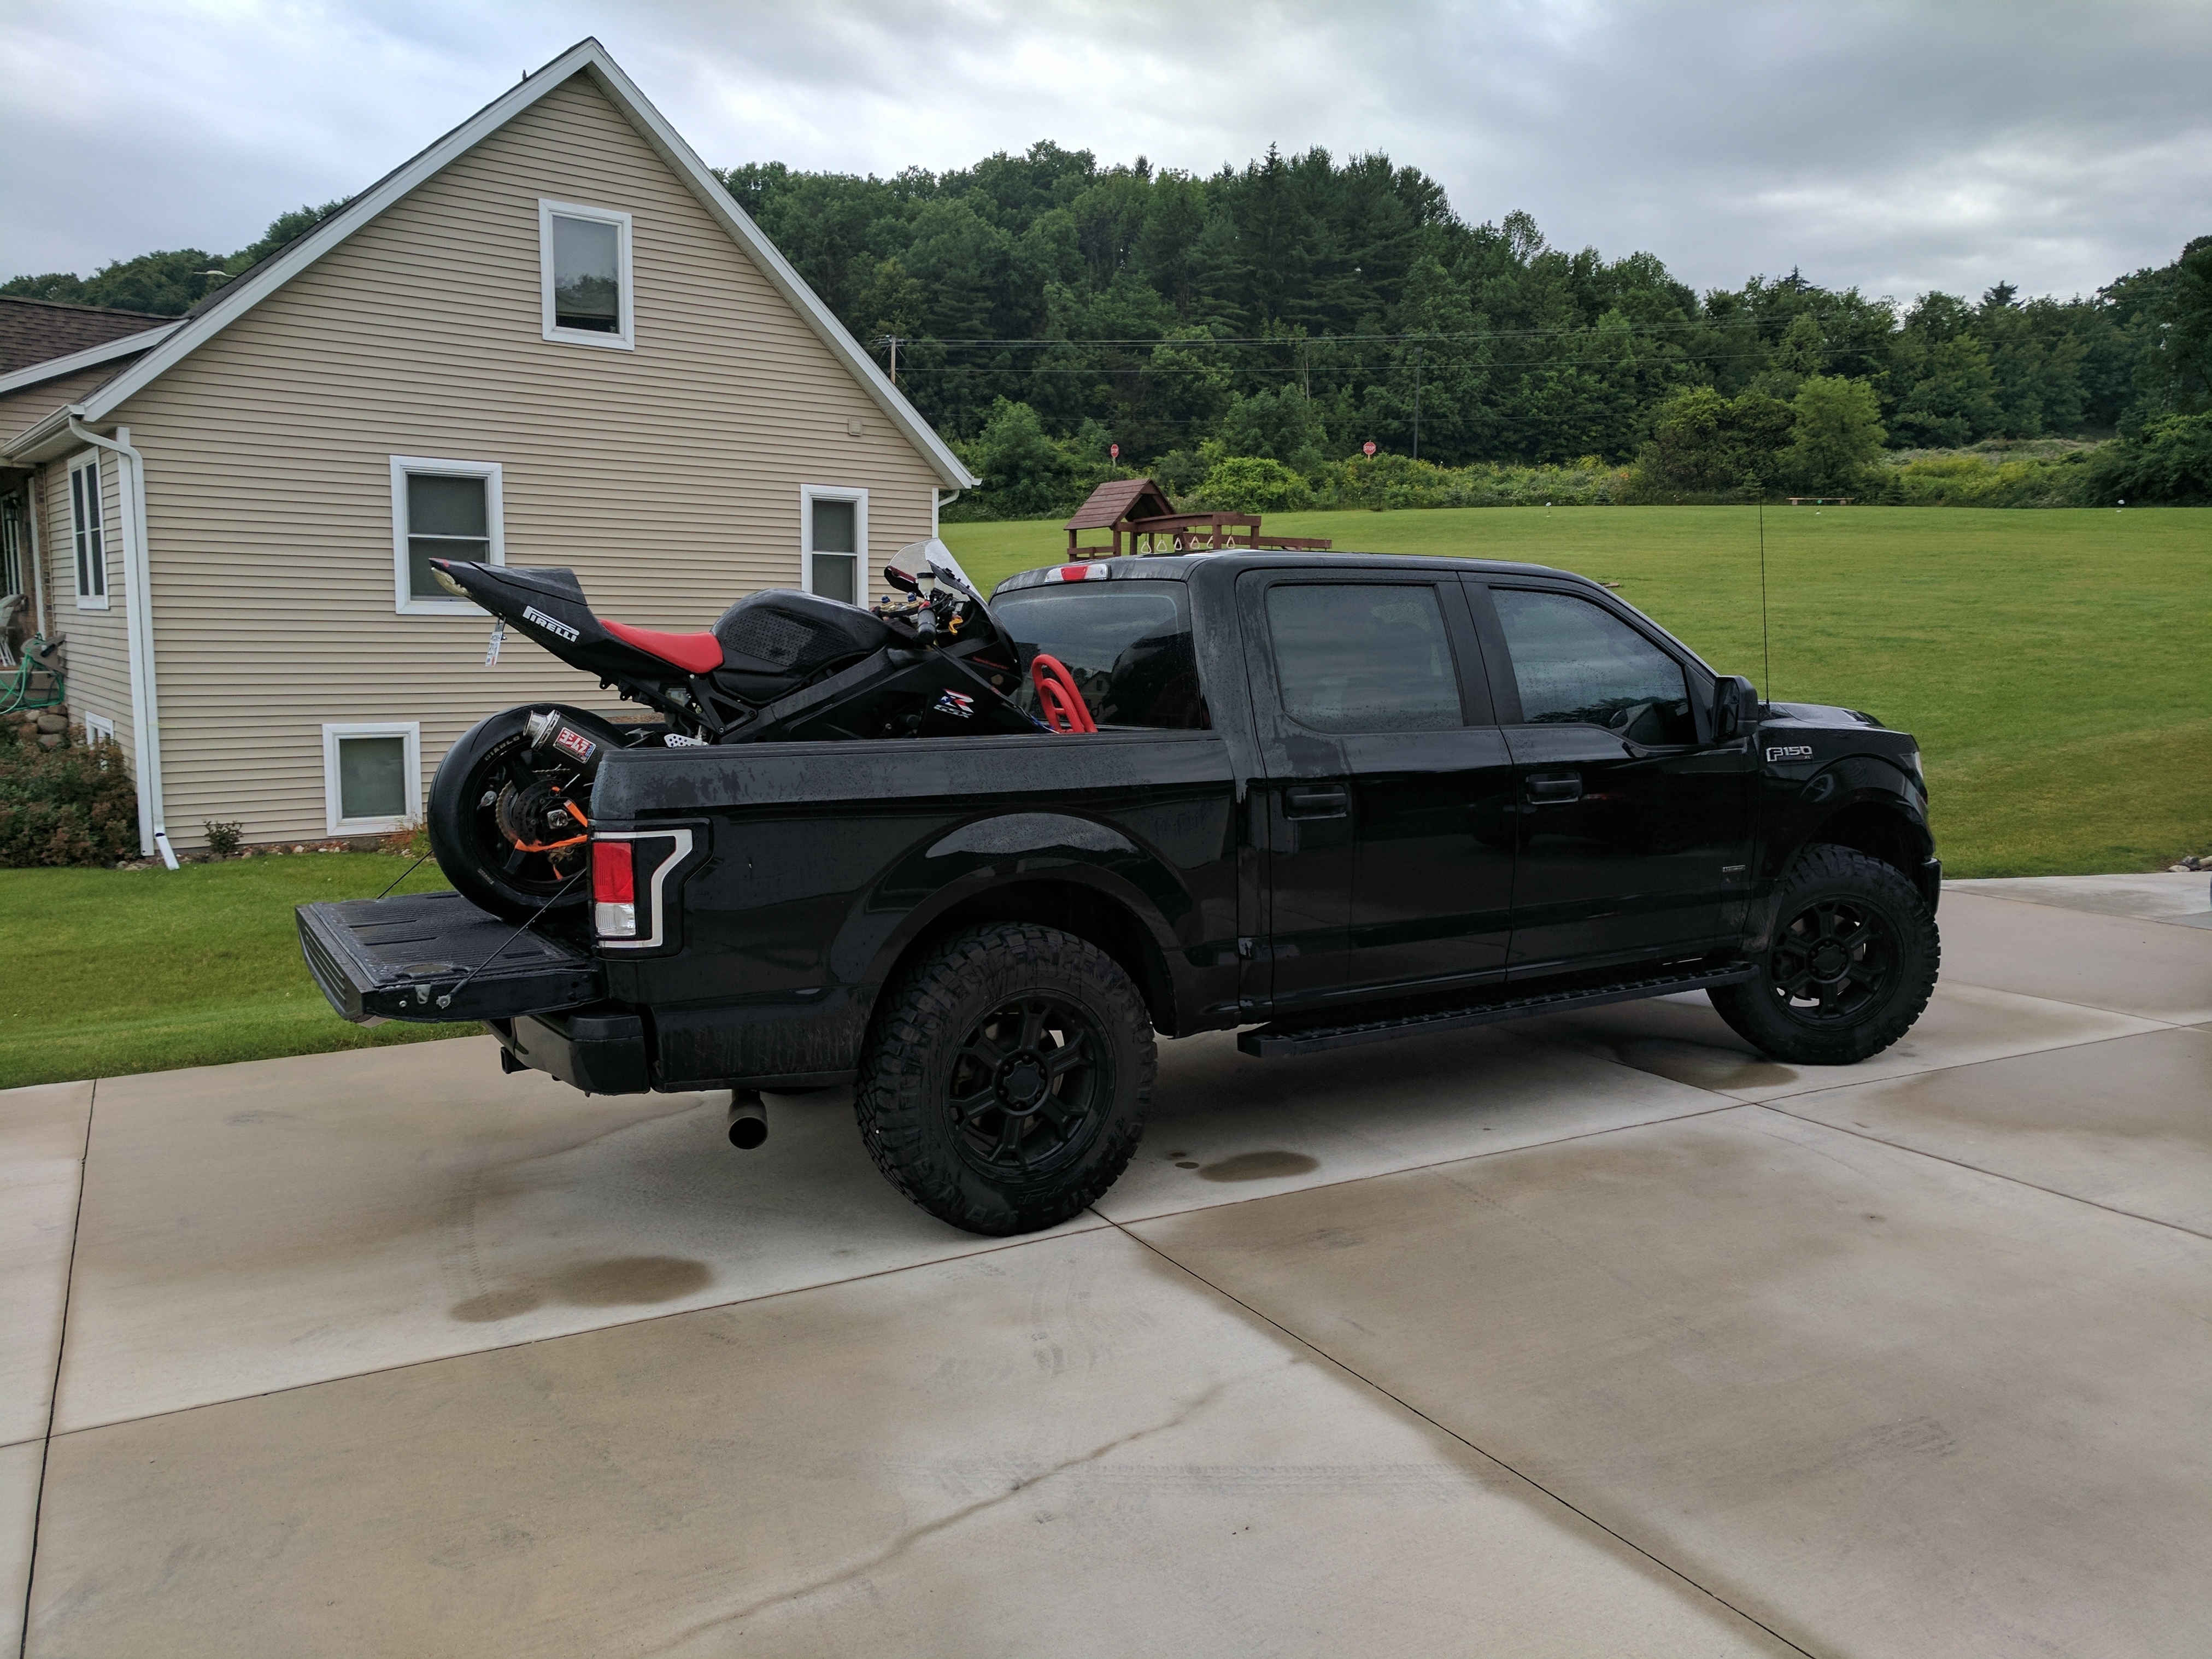 Nitto Ridge Grappler Size Page 2 Ford F150 Forum Community Of Ford Truck Fans